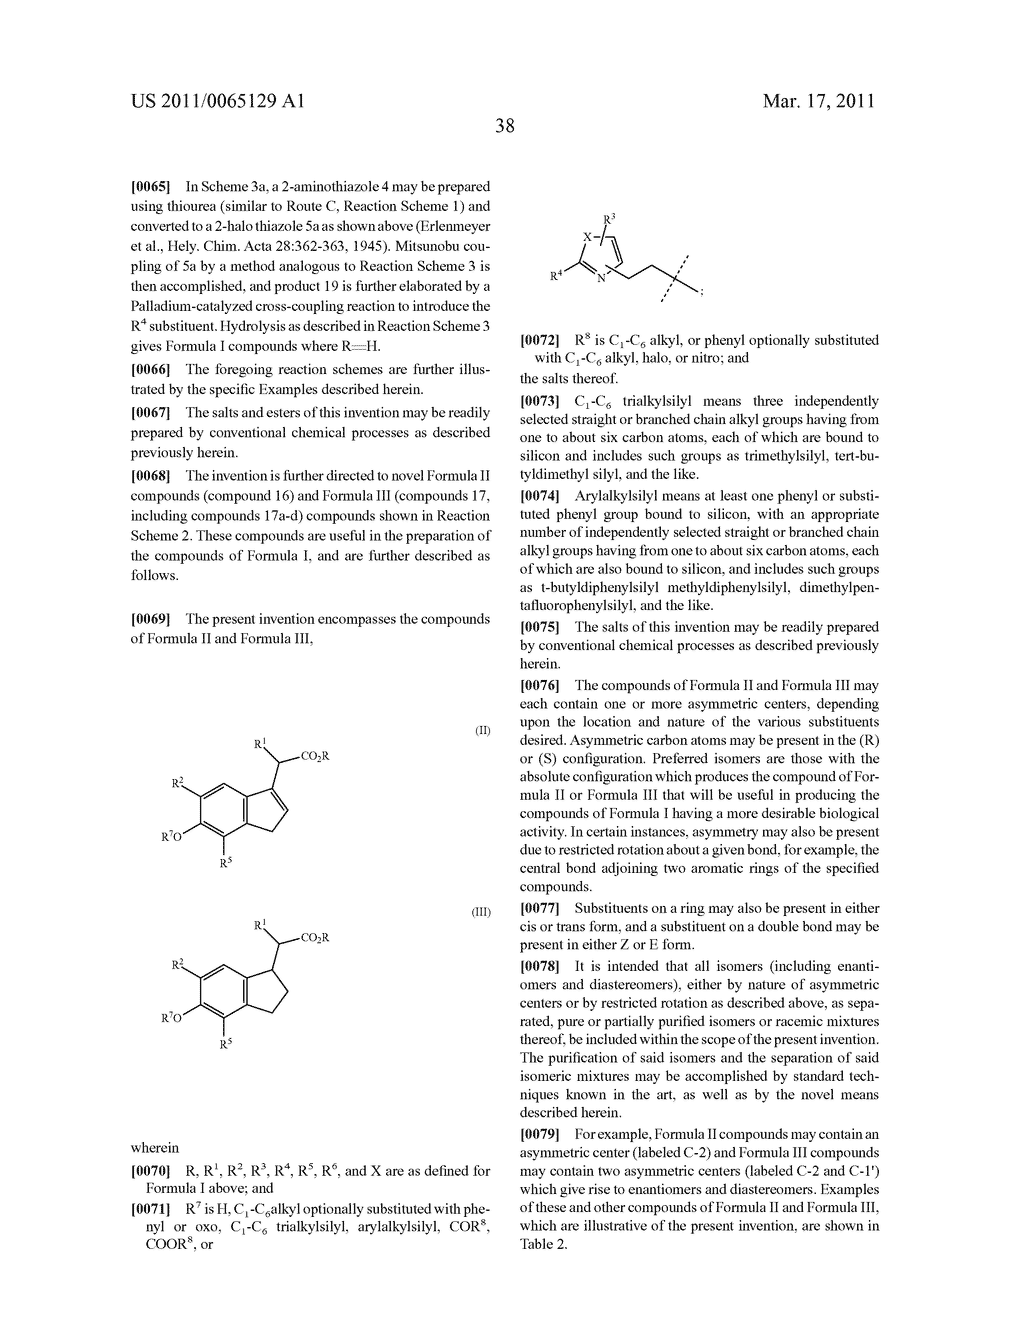 INDANE ACETIC ACID DERIVATIVES AND THEIR USE AS PHARMACEUTICAL AGENTS, INTERMEDIATES, AND METHOD OF PREPARATION - diagram, schematic, and image 39